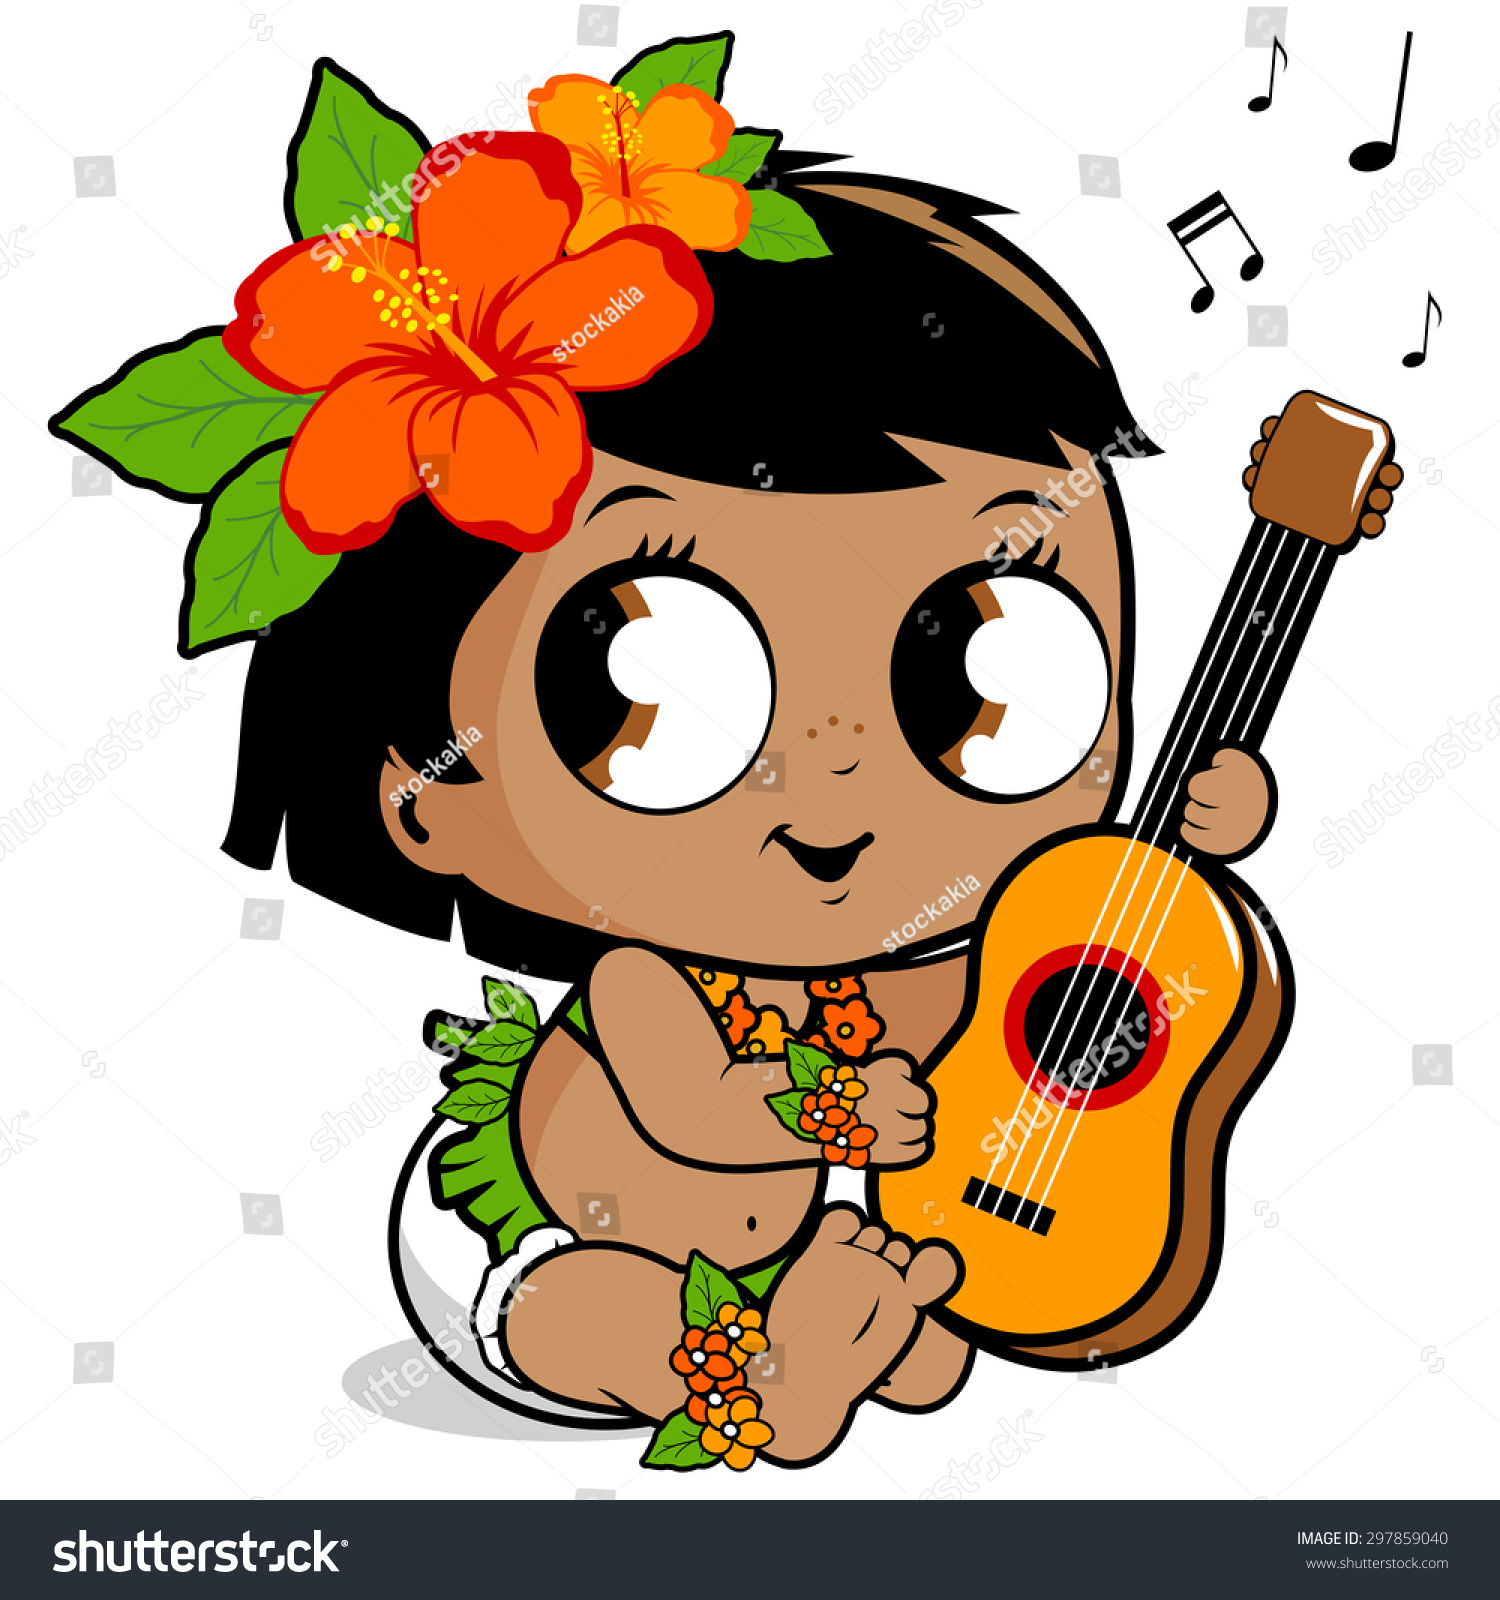 grass skirt pictures clip art free - photo #39